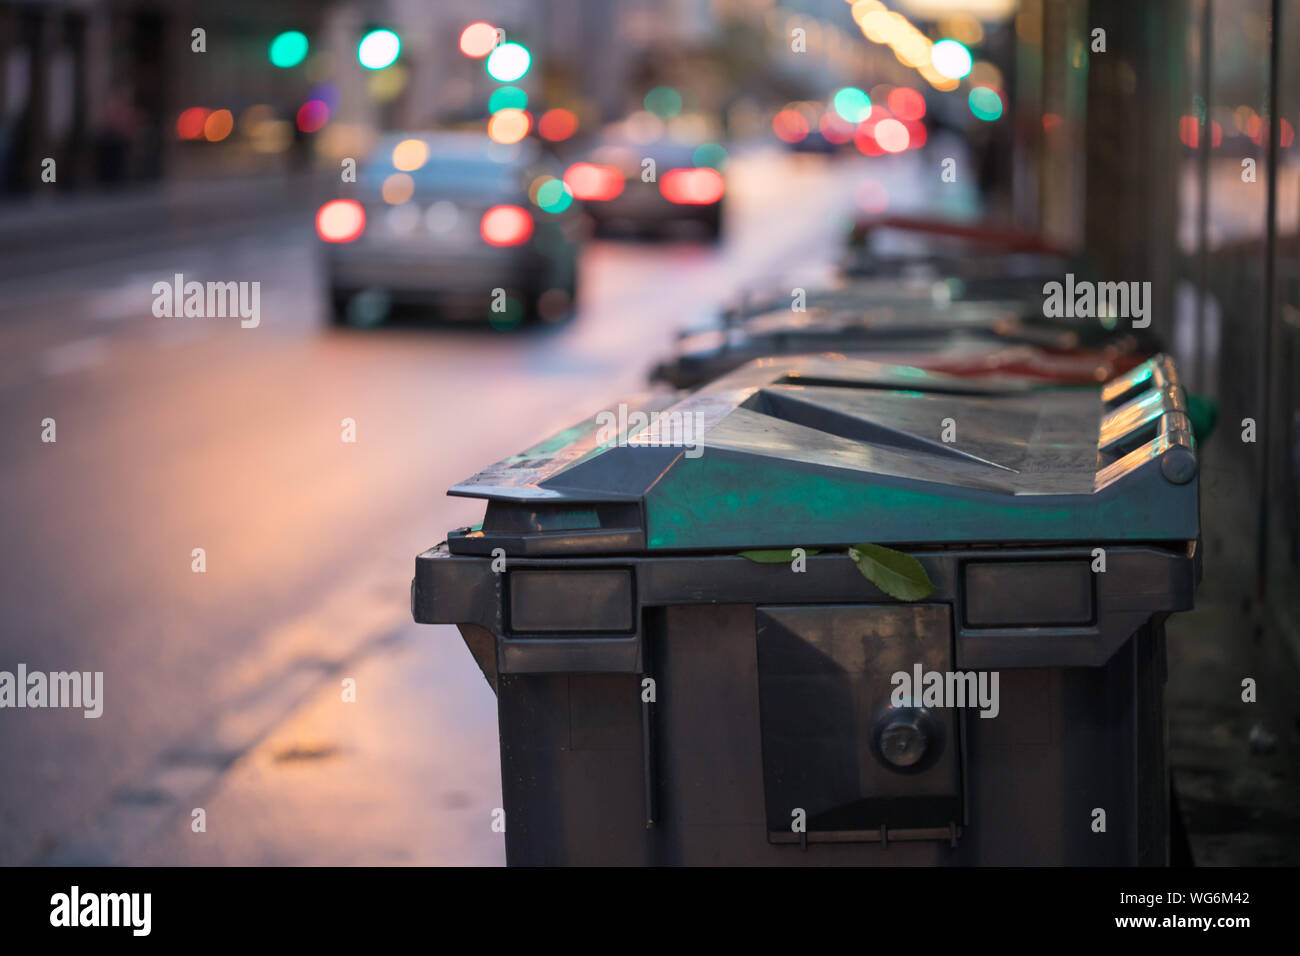 https://c8.alamy.com/comp/WG6M42/urban-street-life-with-garbage-container-and-street-lights-WG6M42.jpg